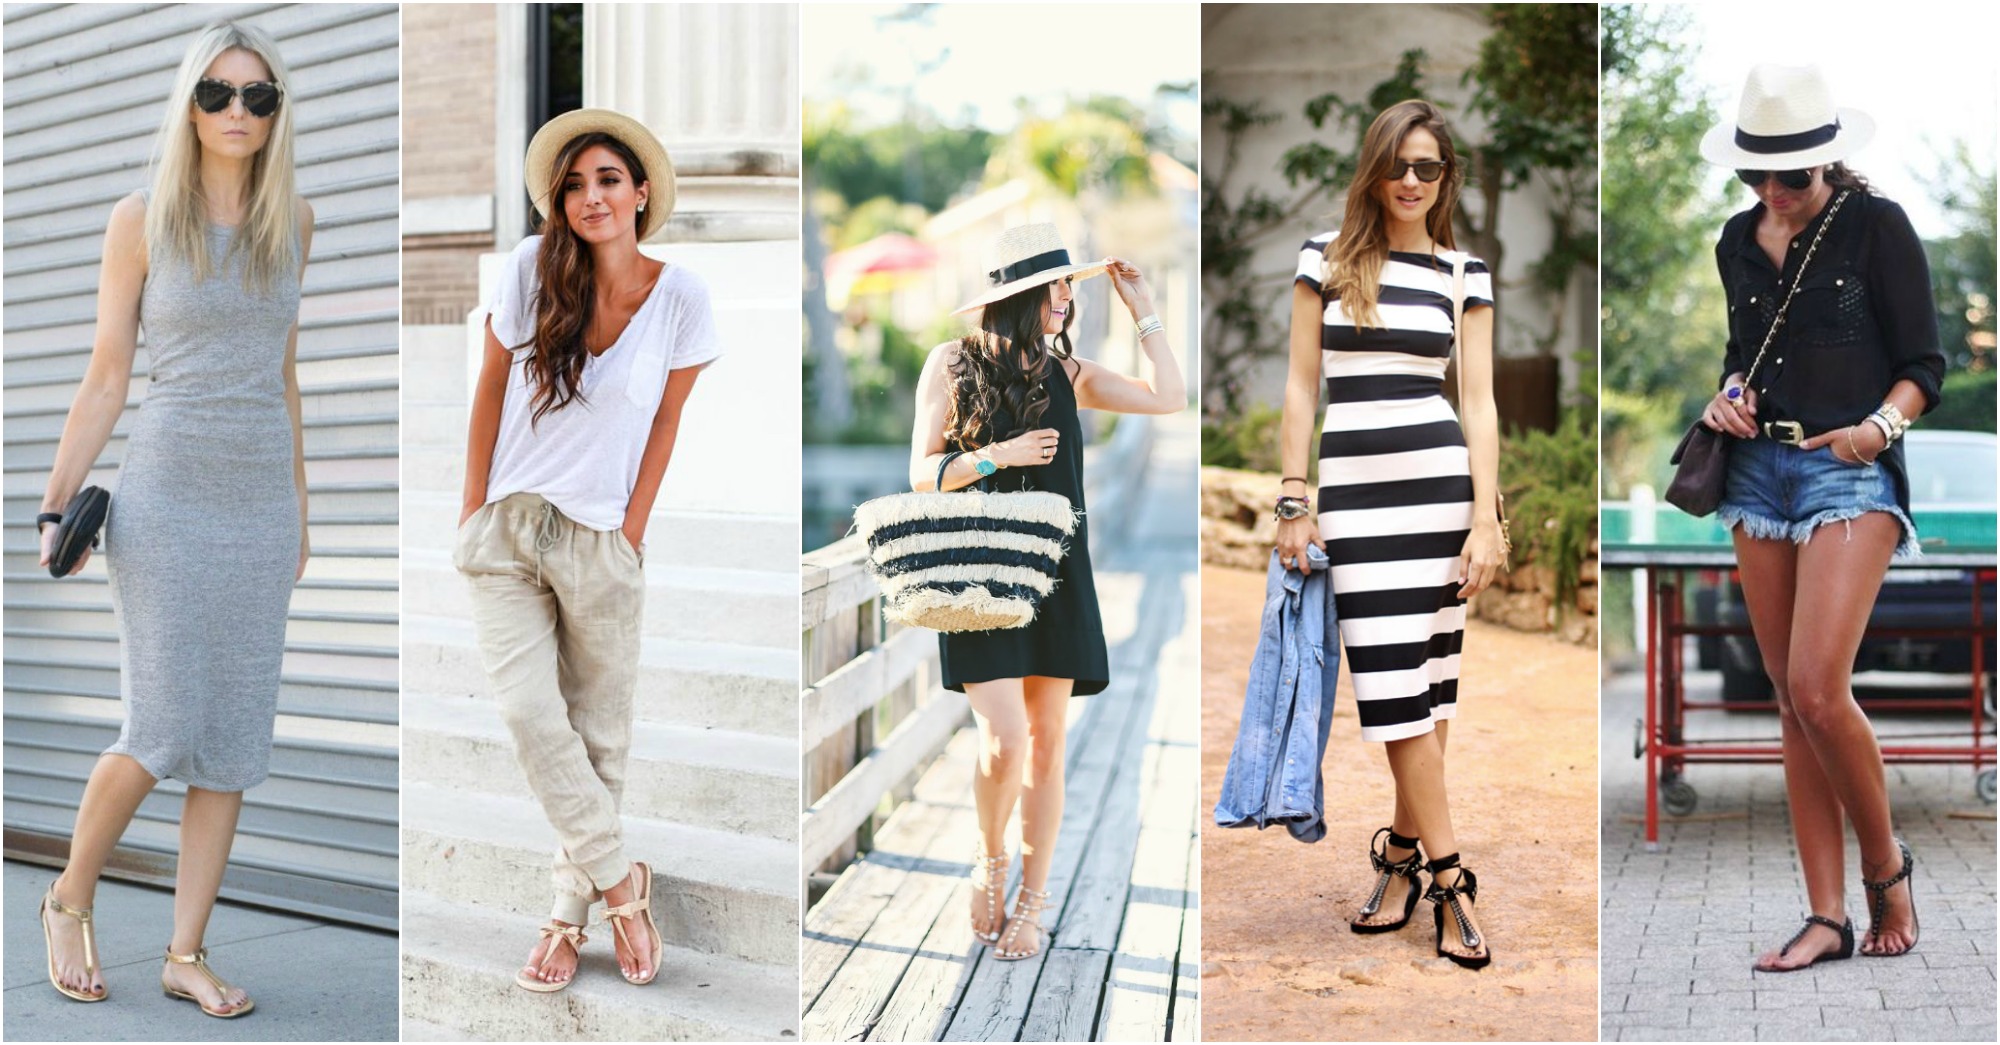 Casual Dress with Thong Sandals Outfits (4 ideas & outfits